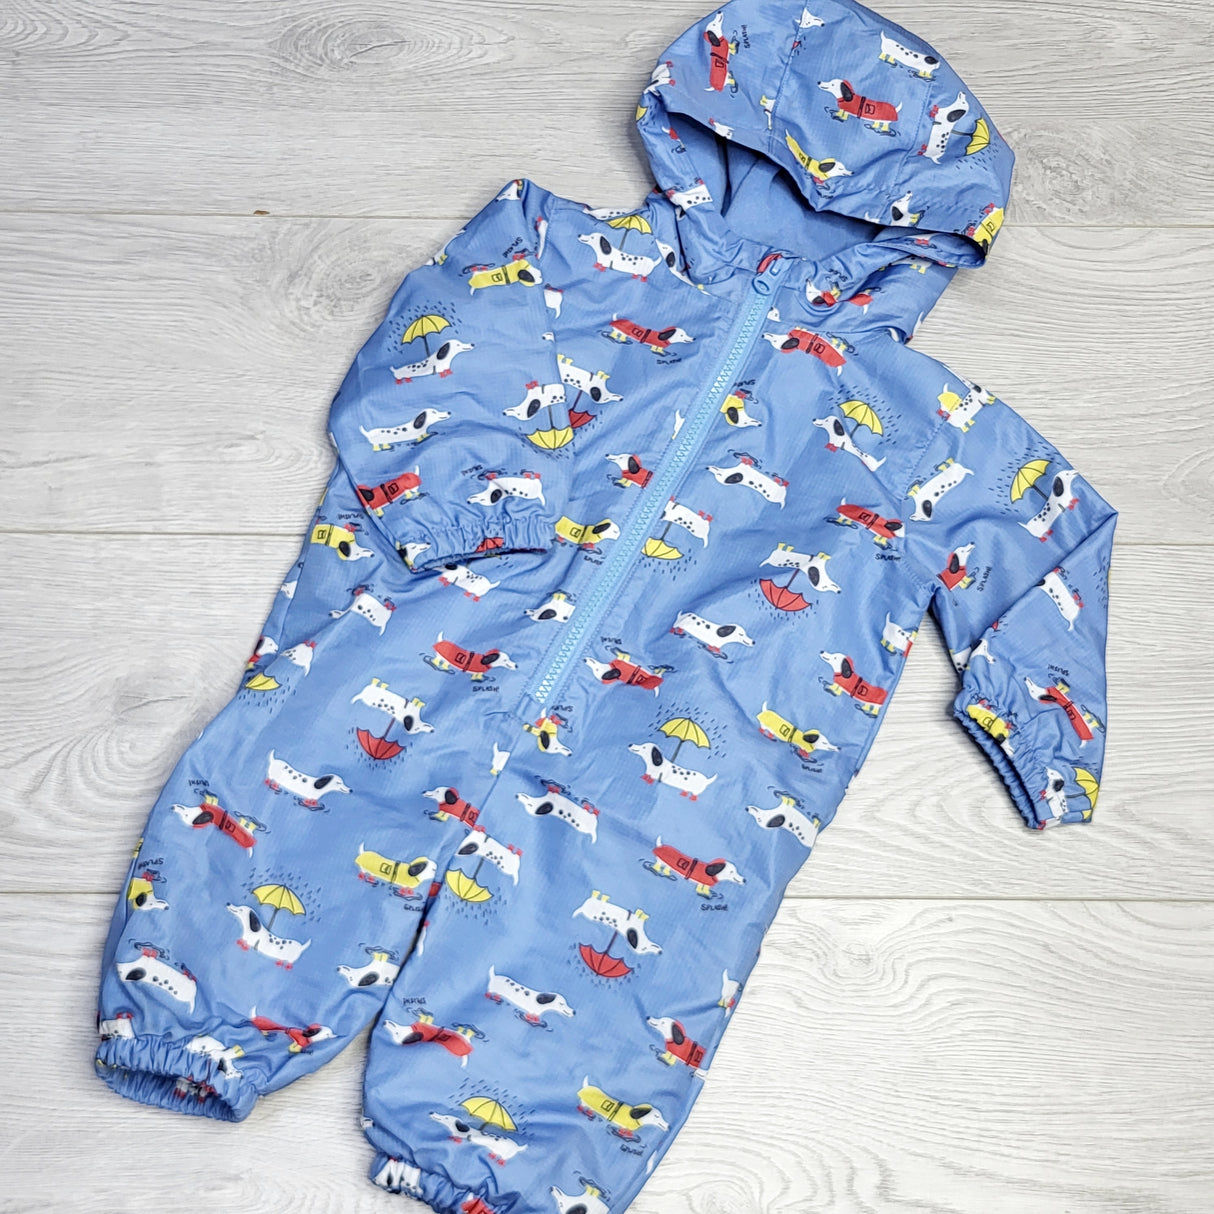 CRTH1 - Joe Fresh blue fleece lined rainsuit with dogs. Size 3-6 months